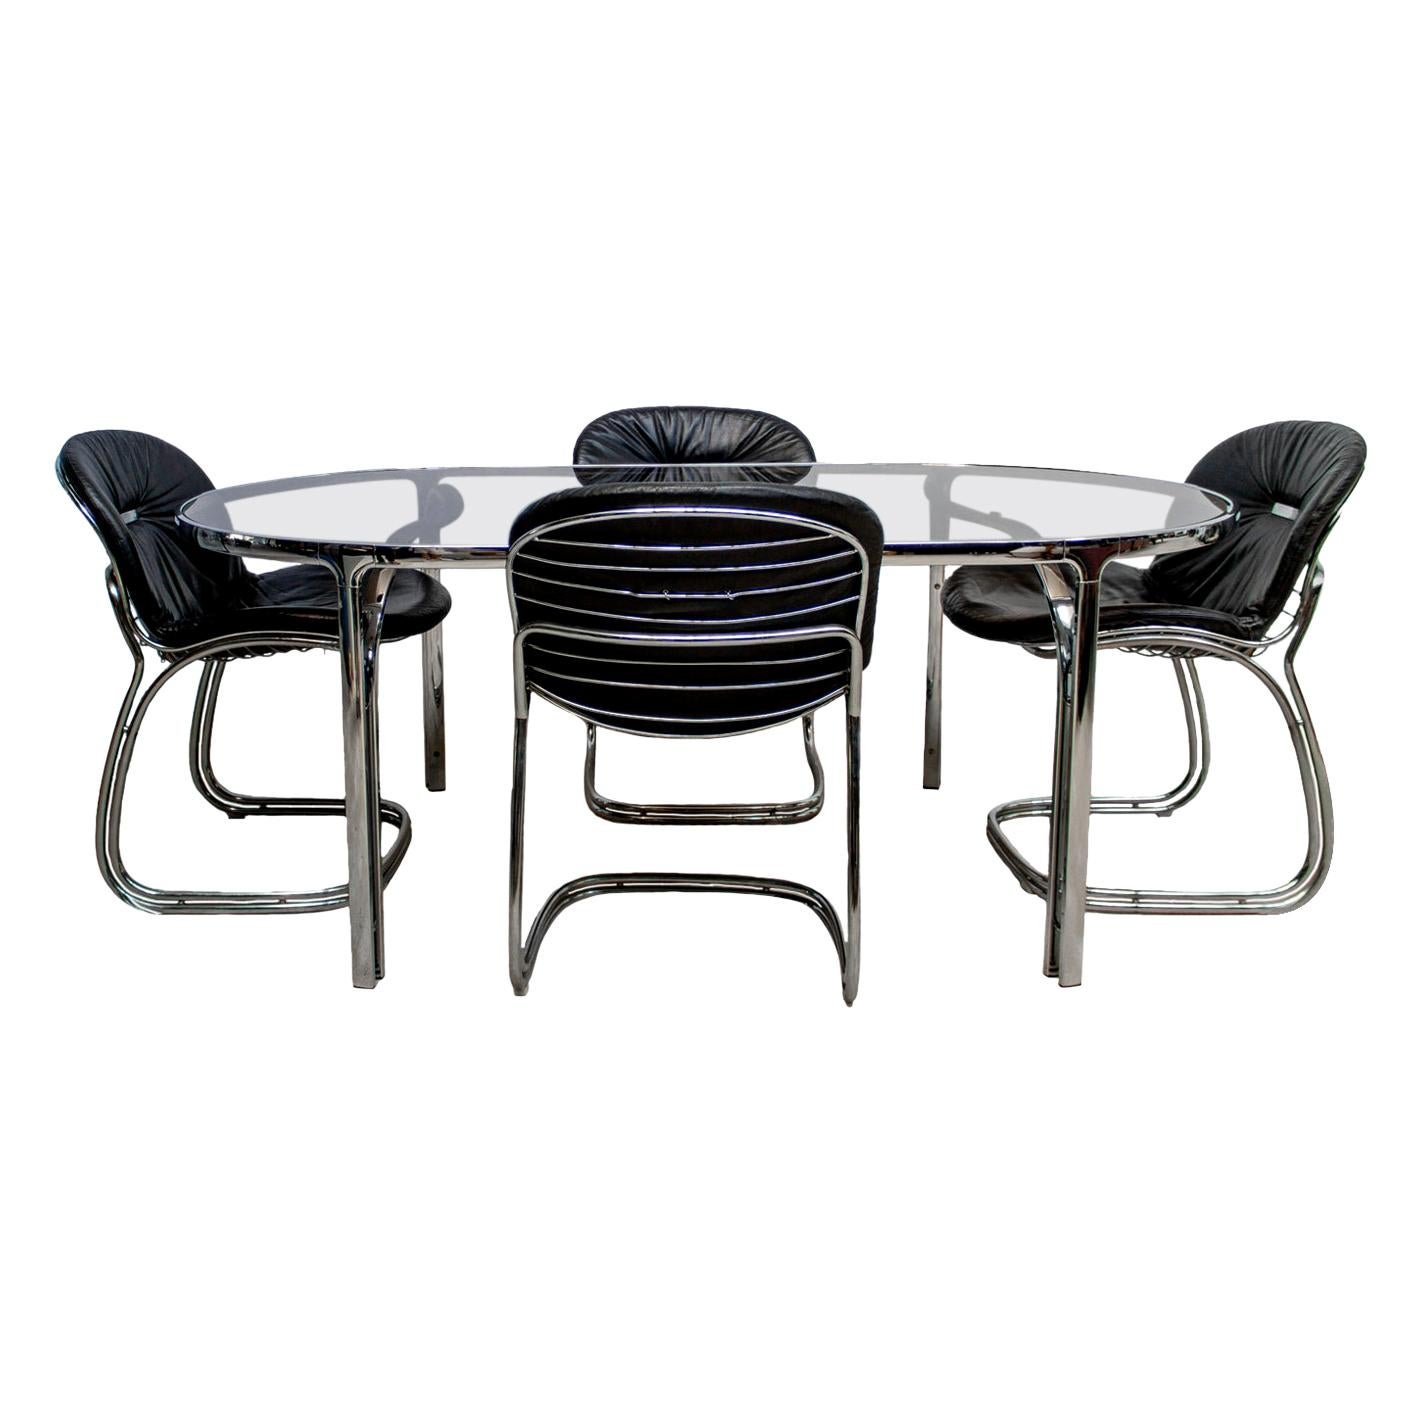 Set of Four Black Italian Sabrina Chairs and Glass Table by Gastone Rinaldi